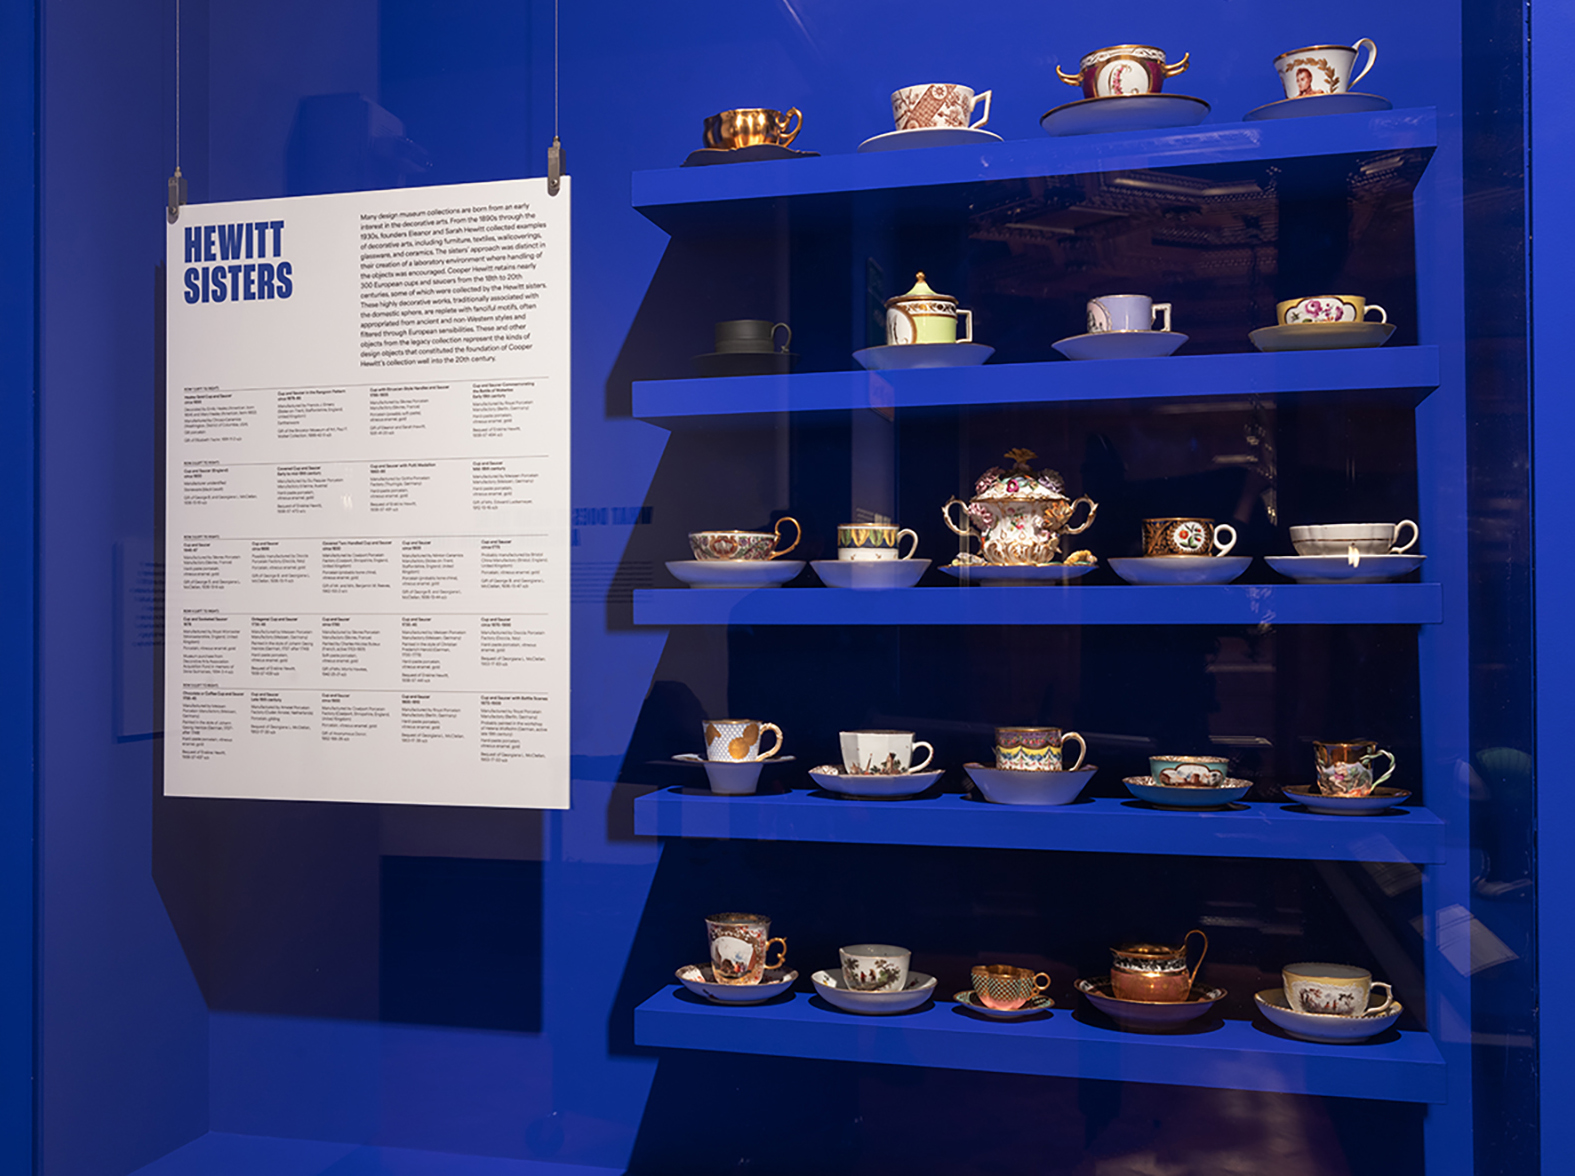 Against a vibrant blue wall, five shelves are installed, each holding either four or five ornately decorated and gilded cups and saucers.